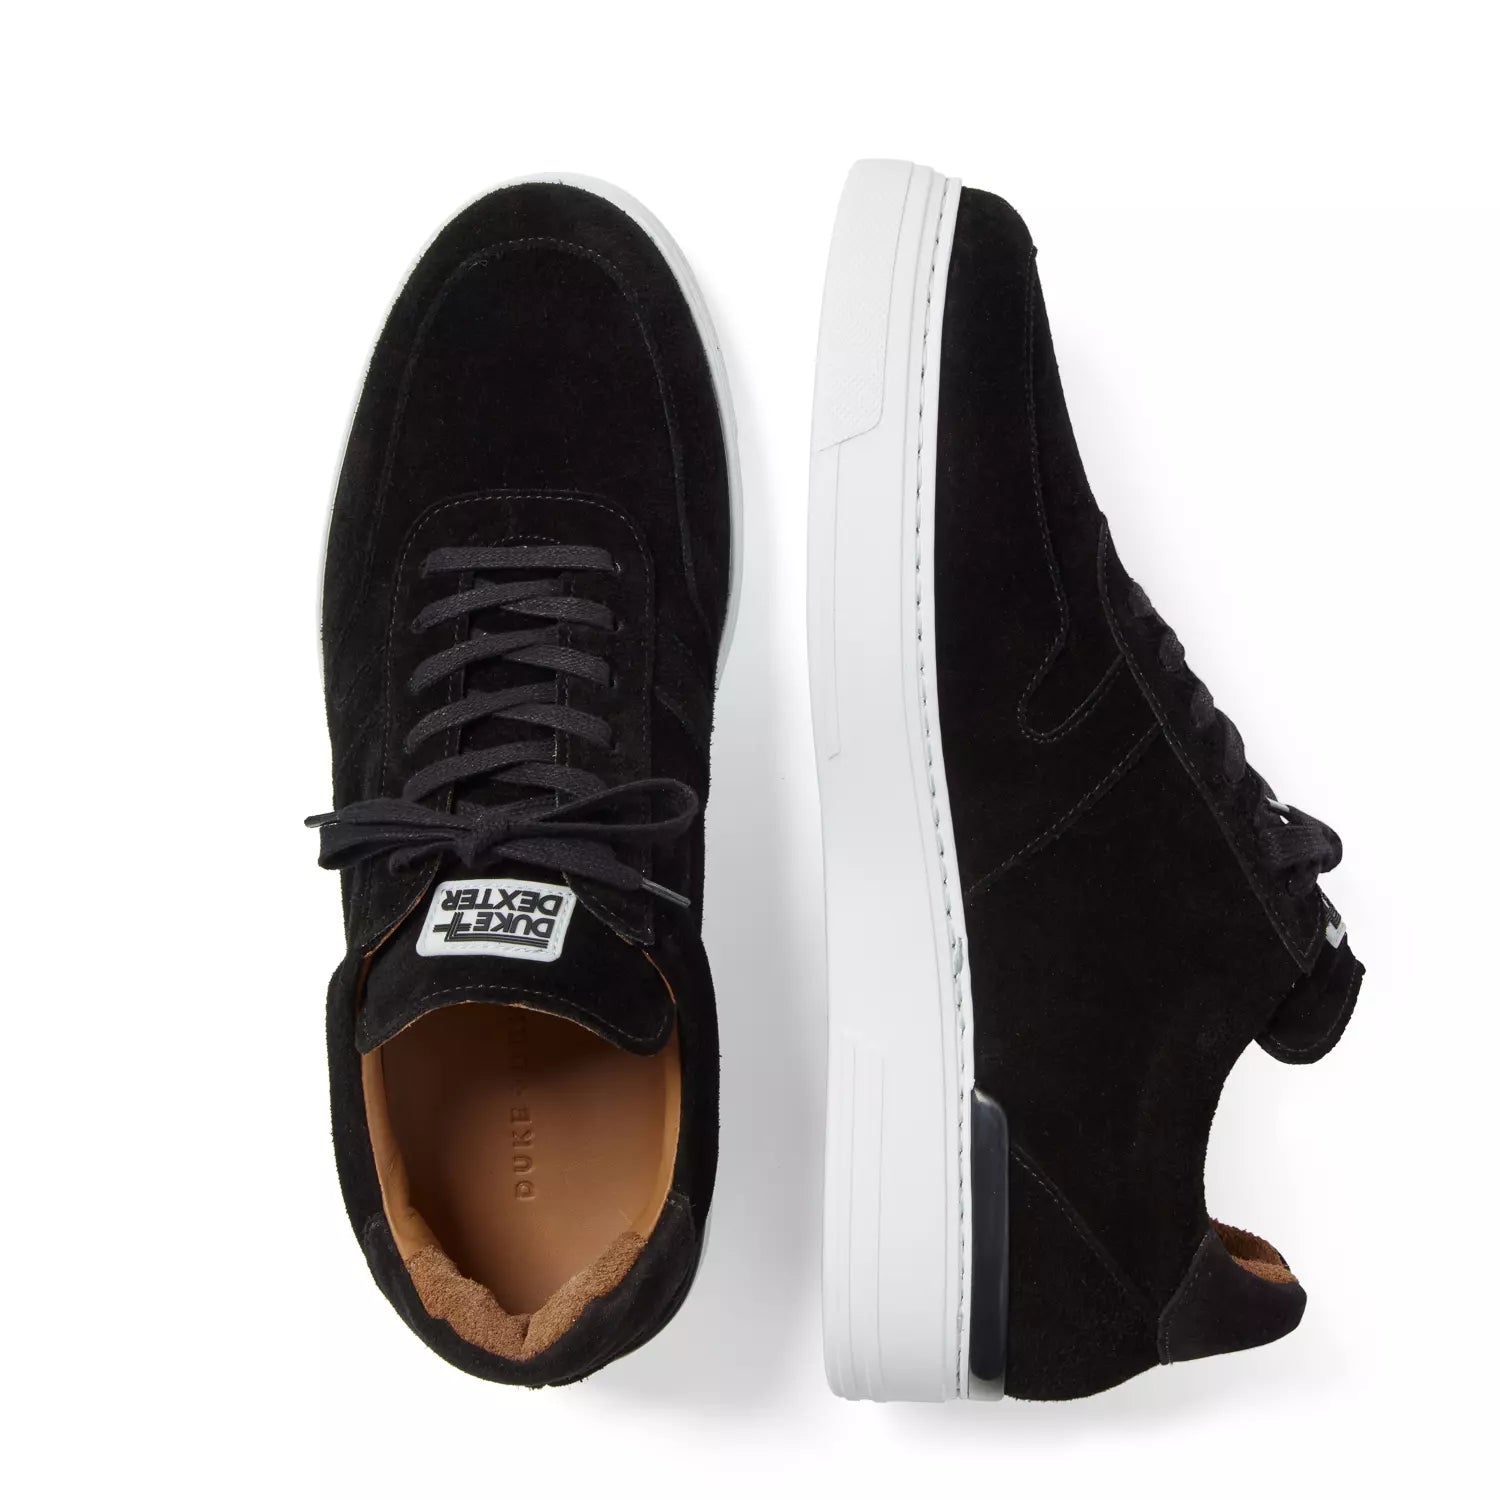 Duke and Dexter Ritchie Black Sneaker for men top view